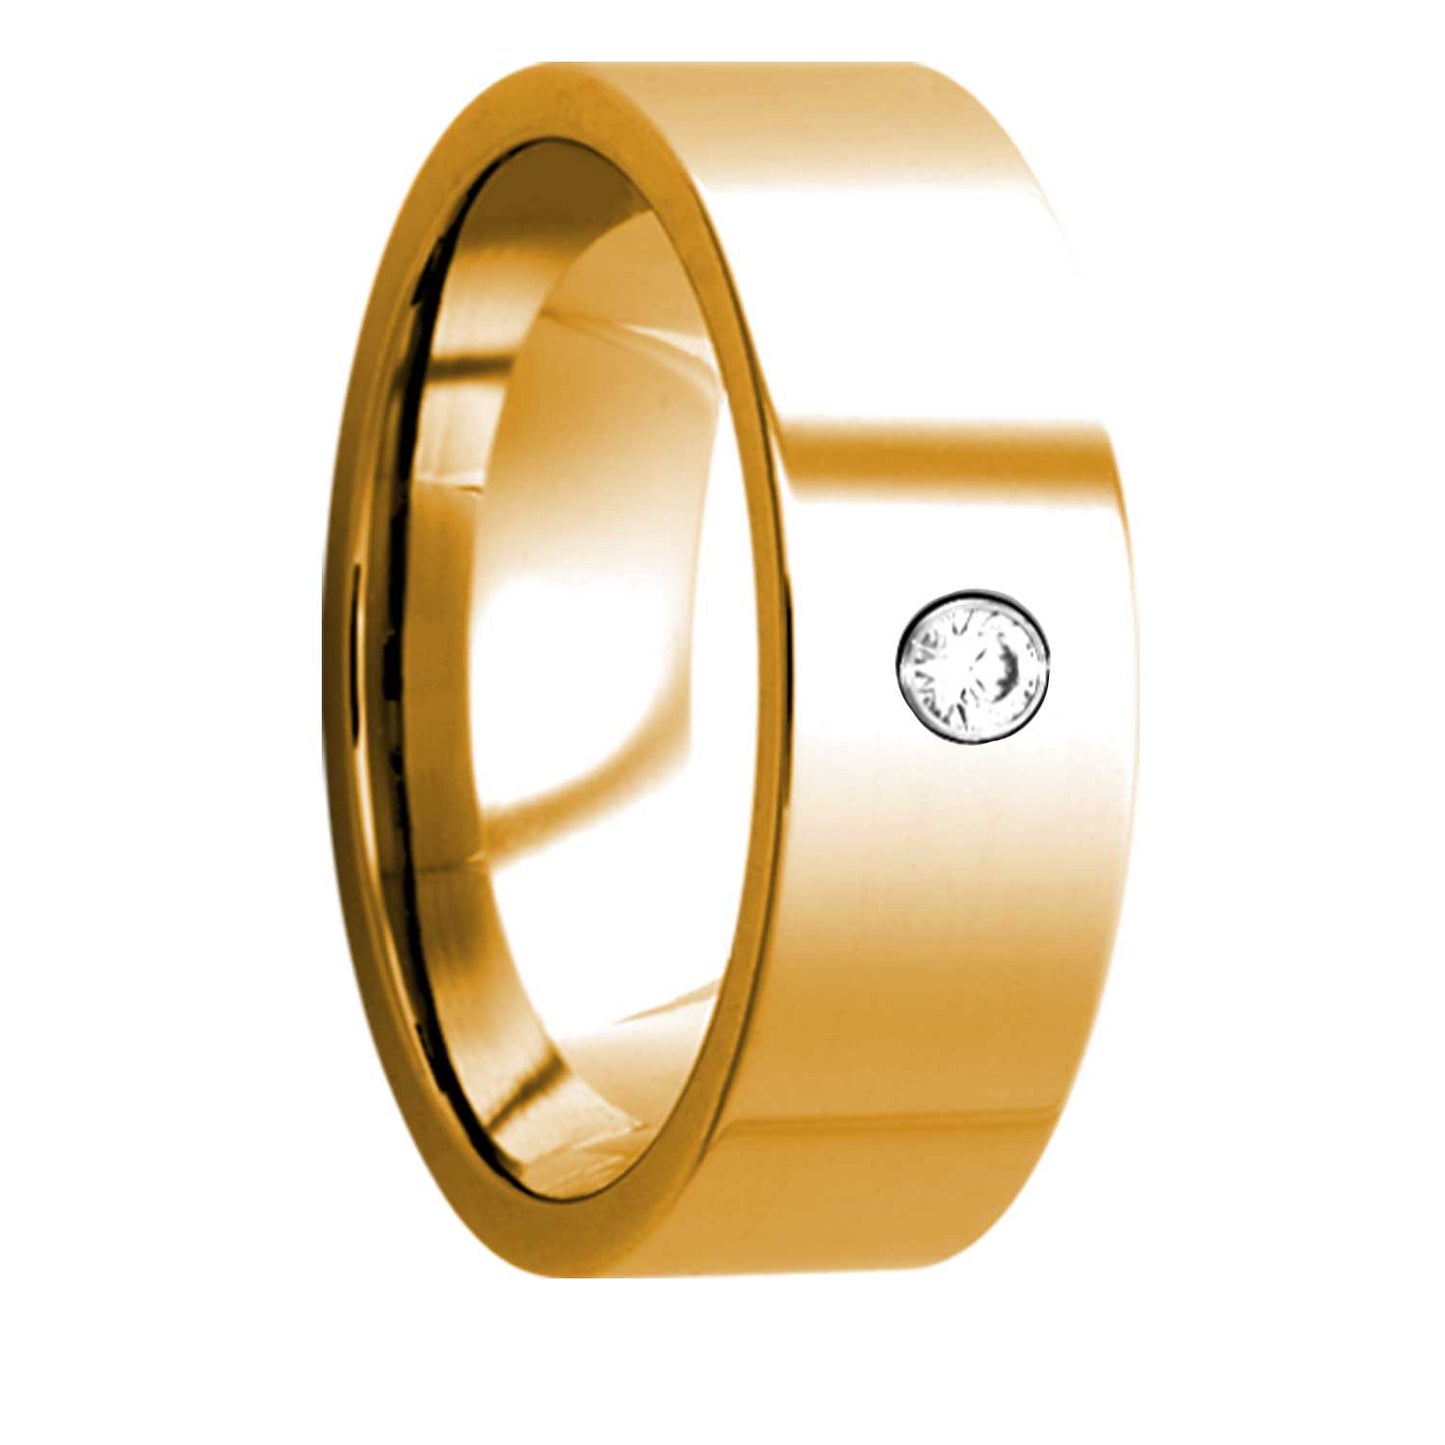 A 14k gold wedding band with diamond displayed on a neutral white background.